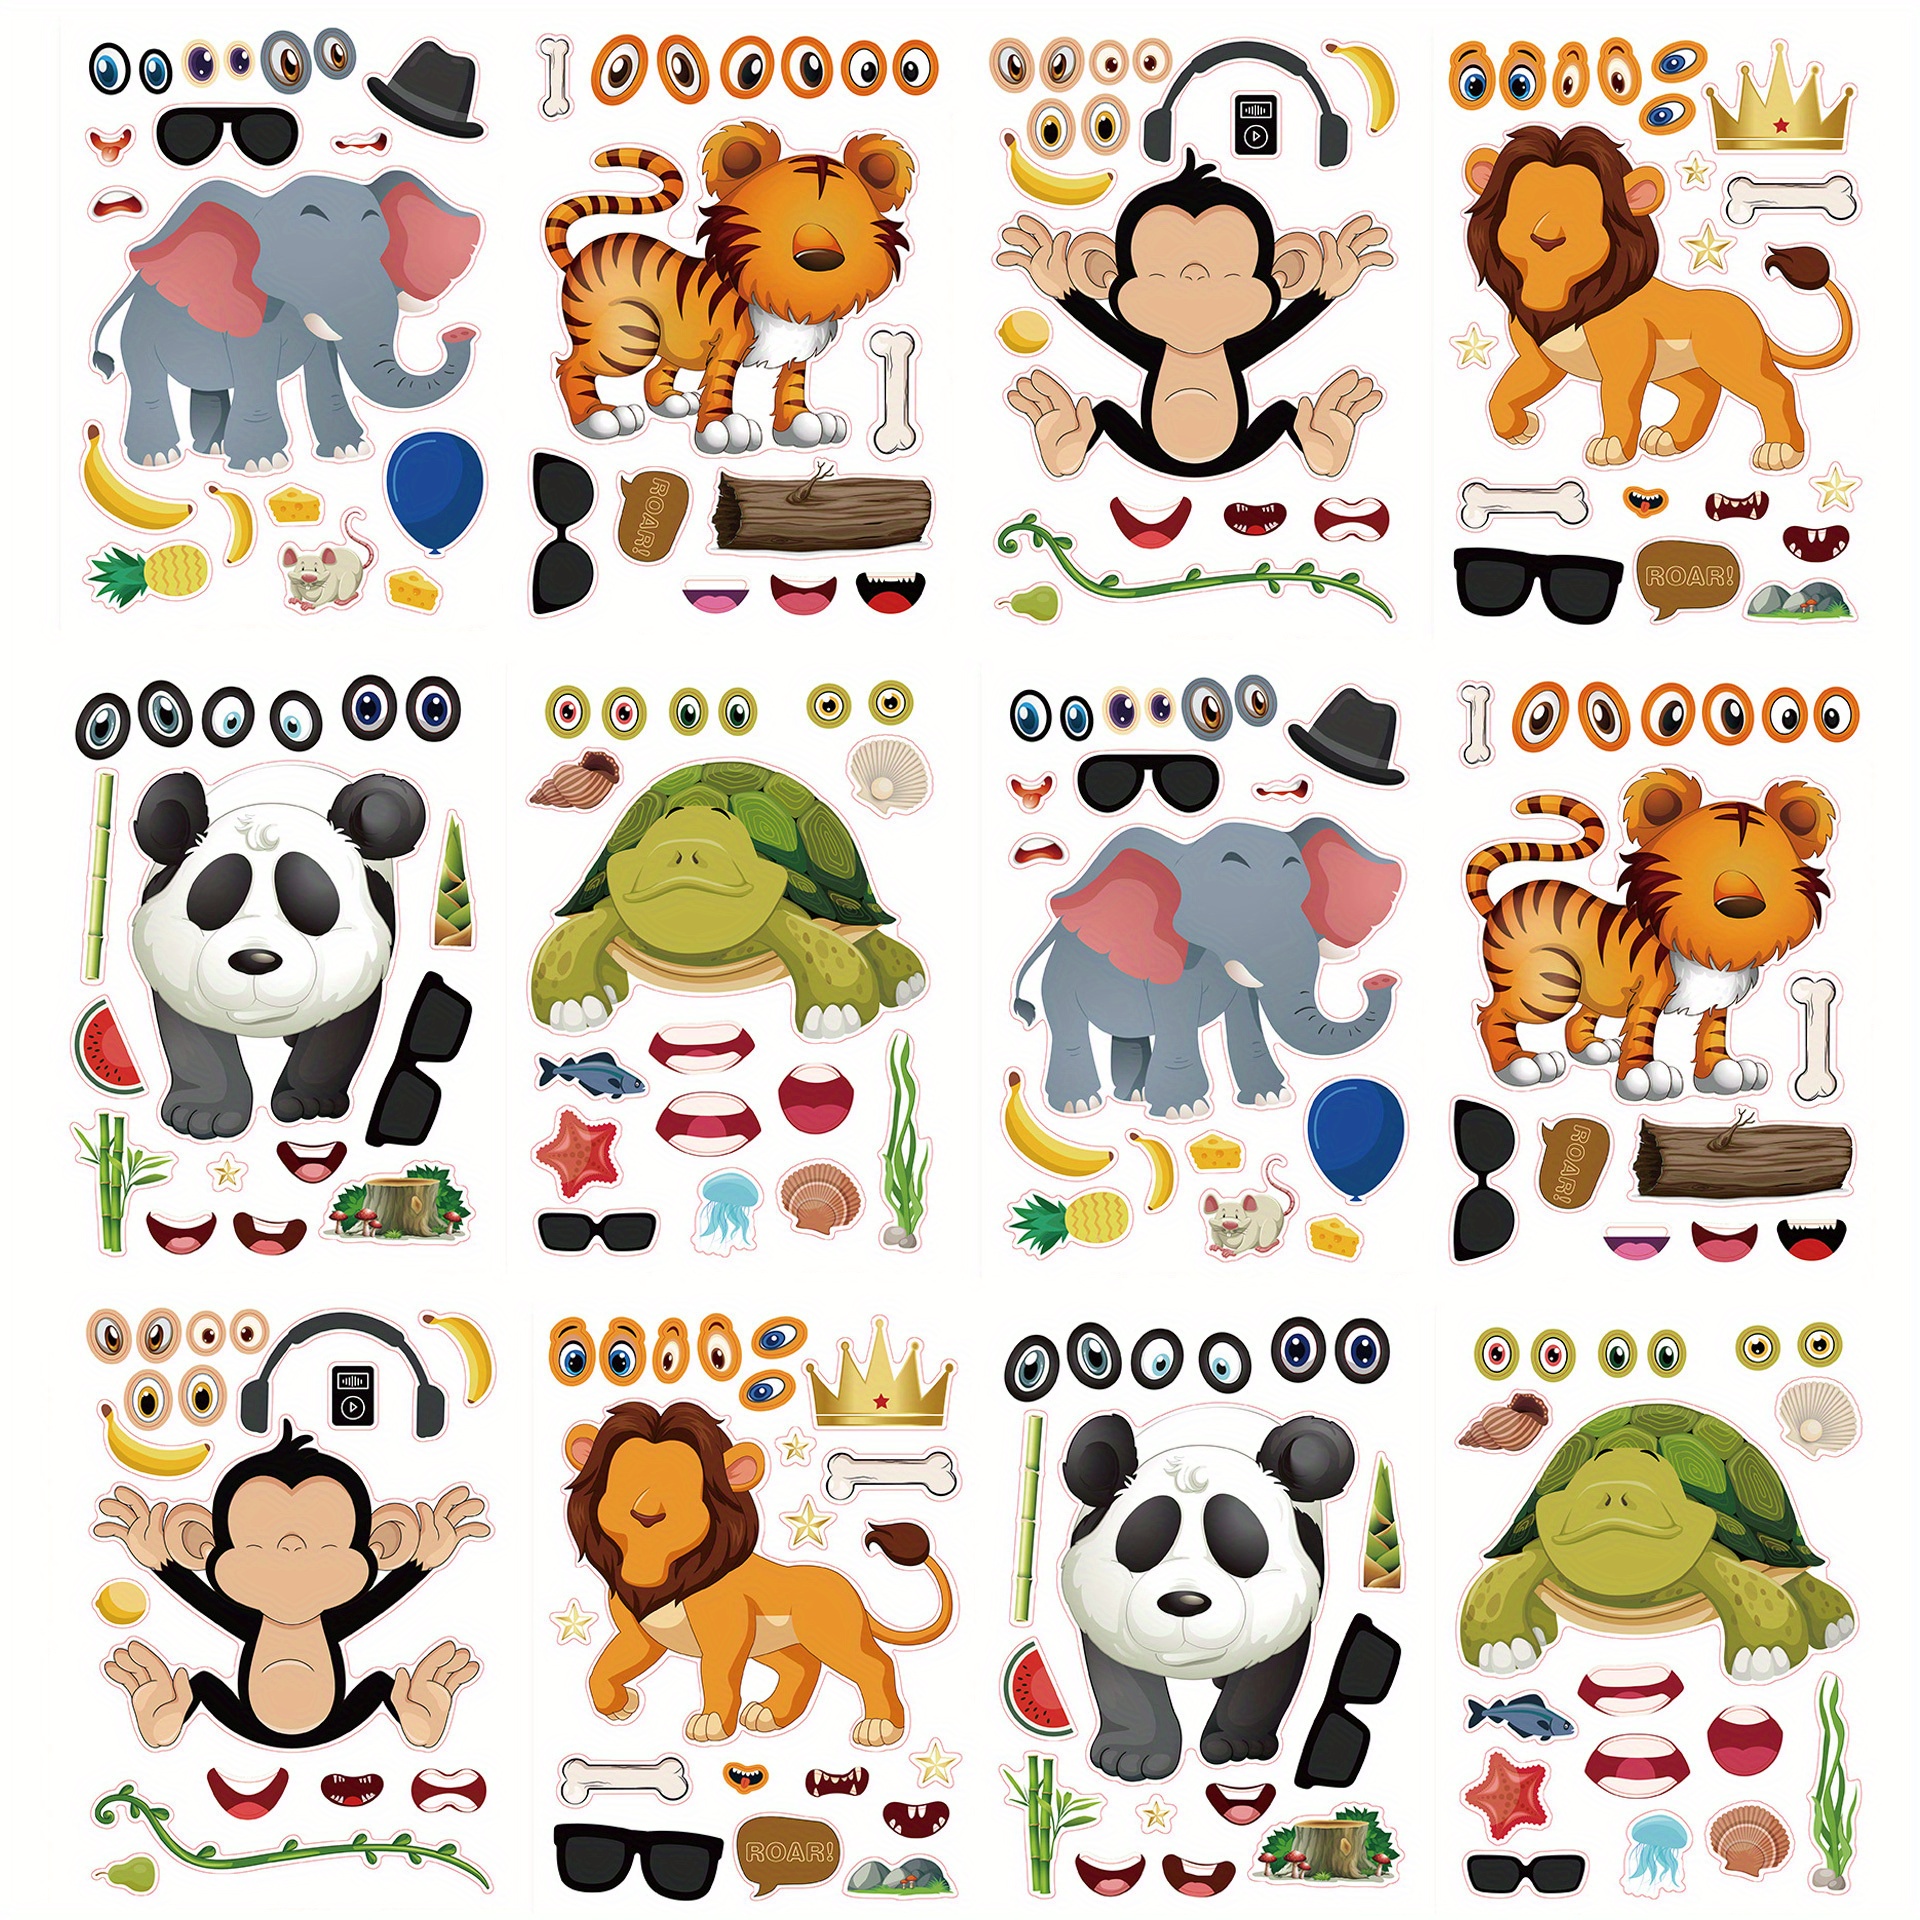 

6pcs/12pcs Zoo Lion Tiger Elephant Monkey Stickers, Face Changing Cartoon Puzzle Holiday Party Decoration Birthday Gift Handcraft Stickers, Animal Diy Stickers For Laptop Water Bottle Phone Skateboard